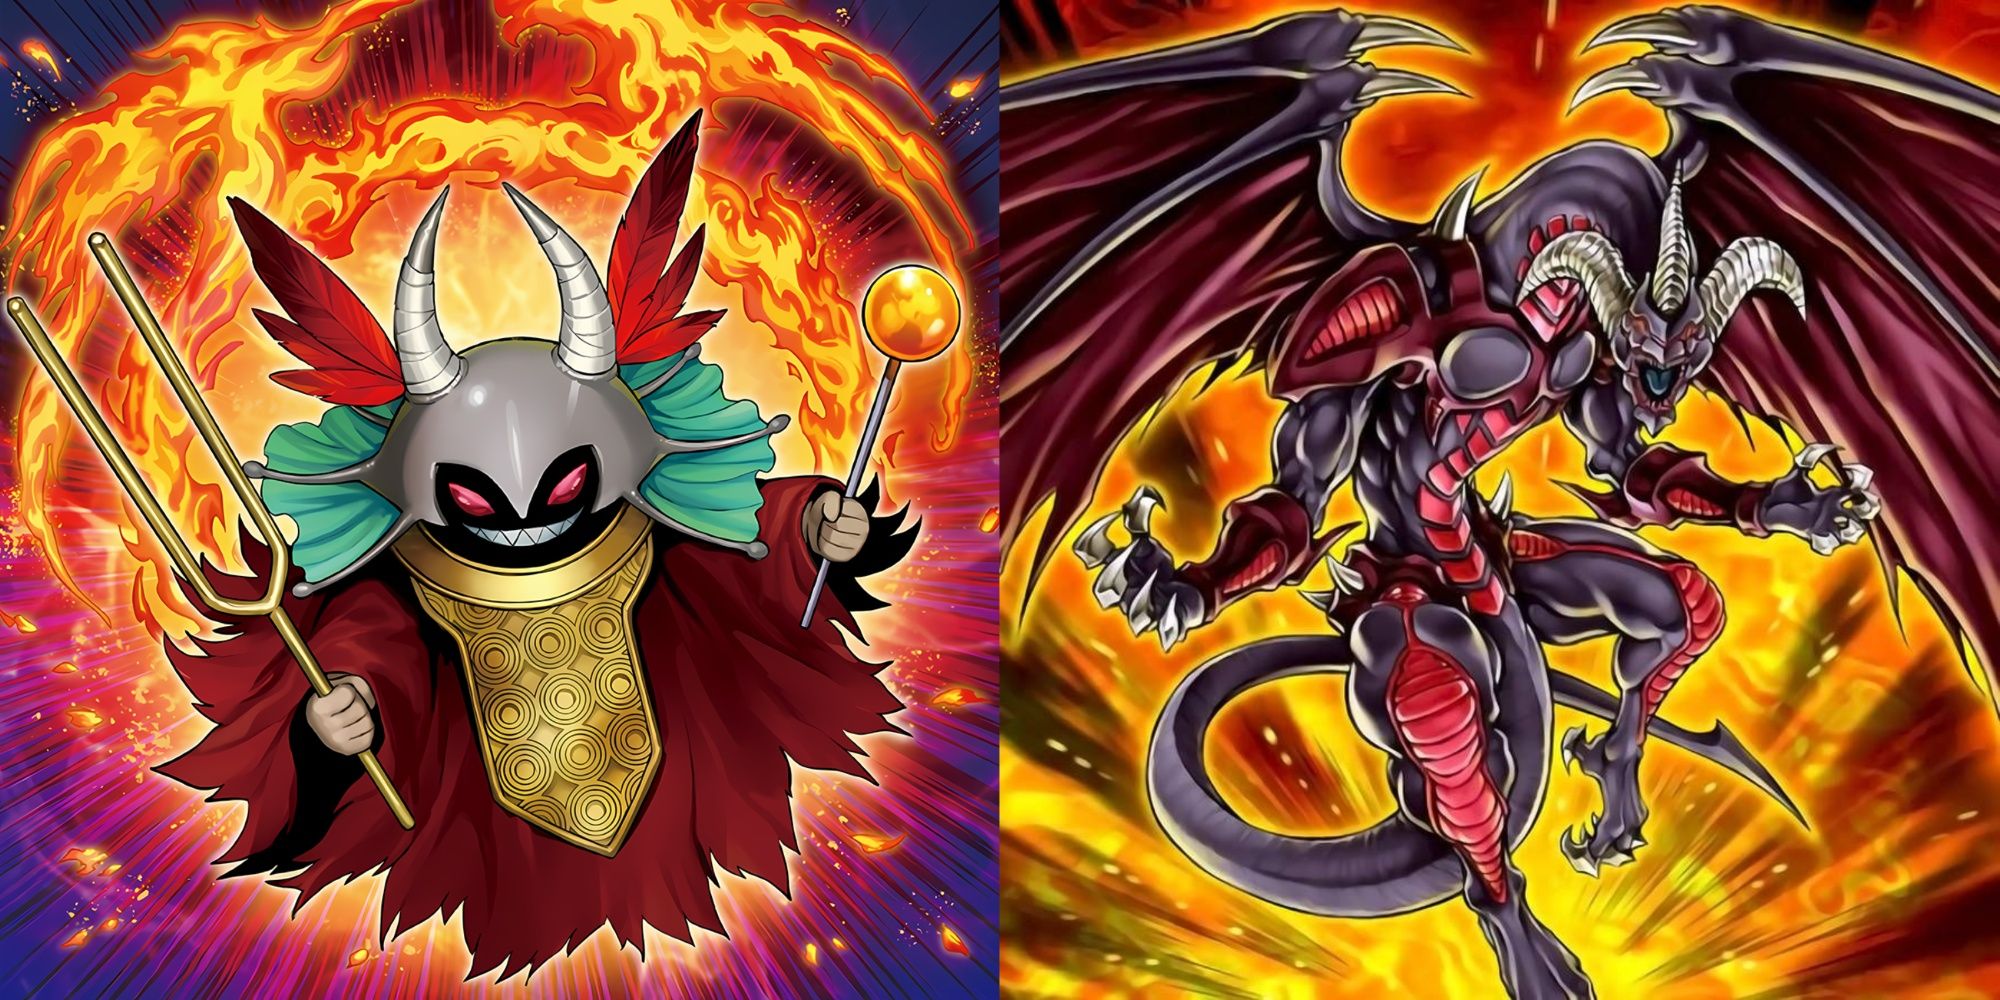 YGO Soul Resonator and Red Dragon Archfiend card artworks